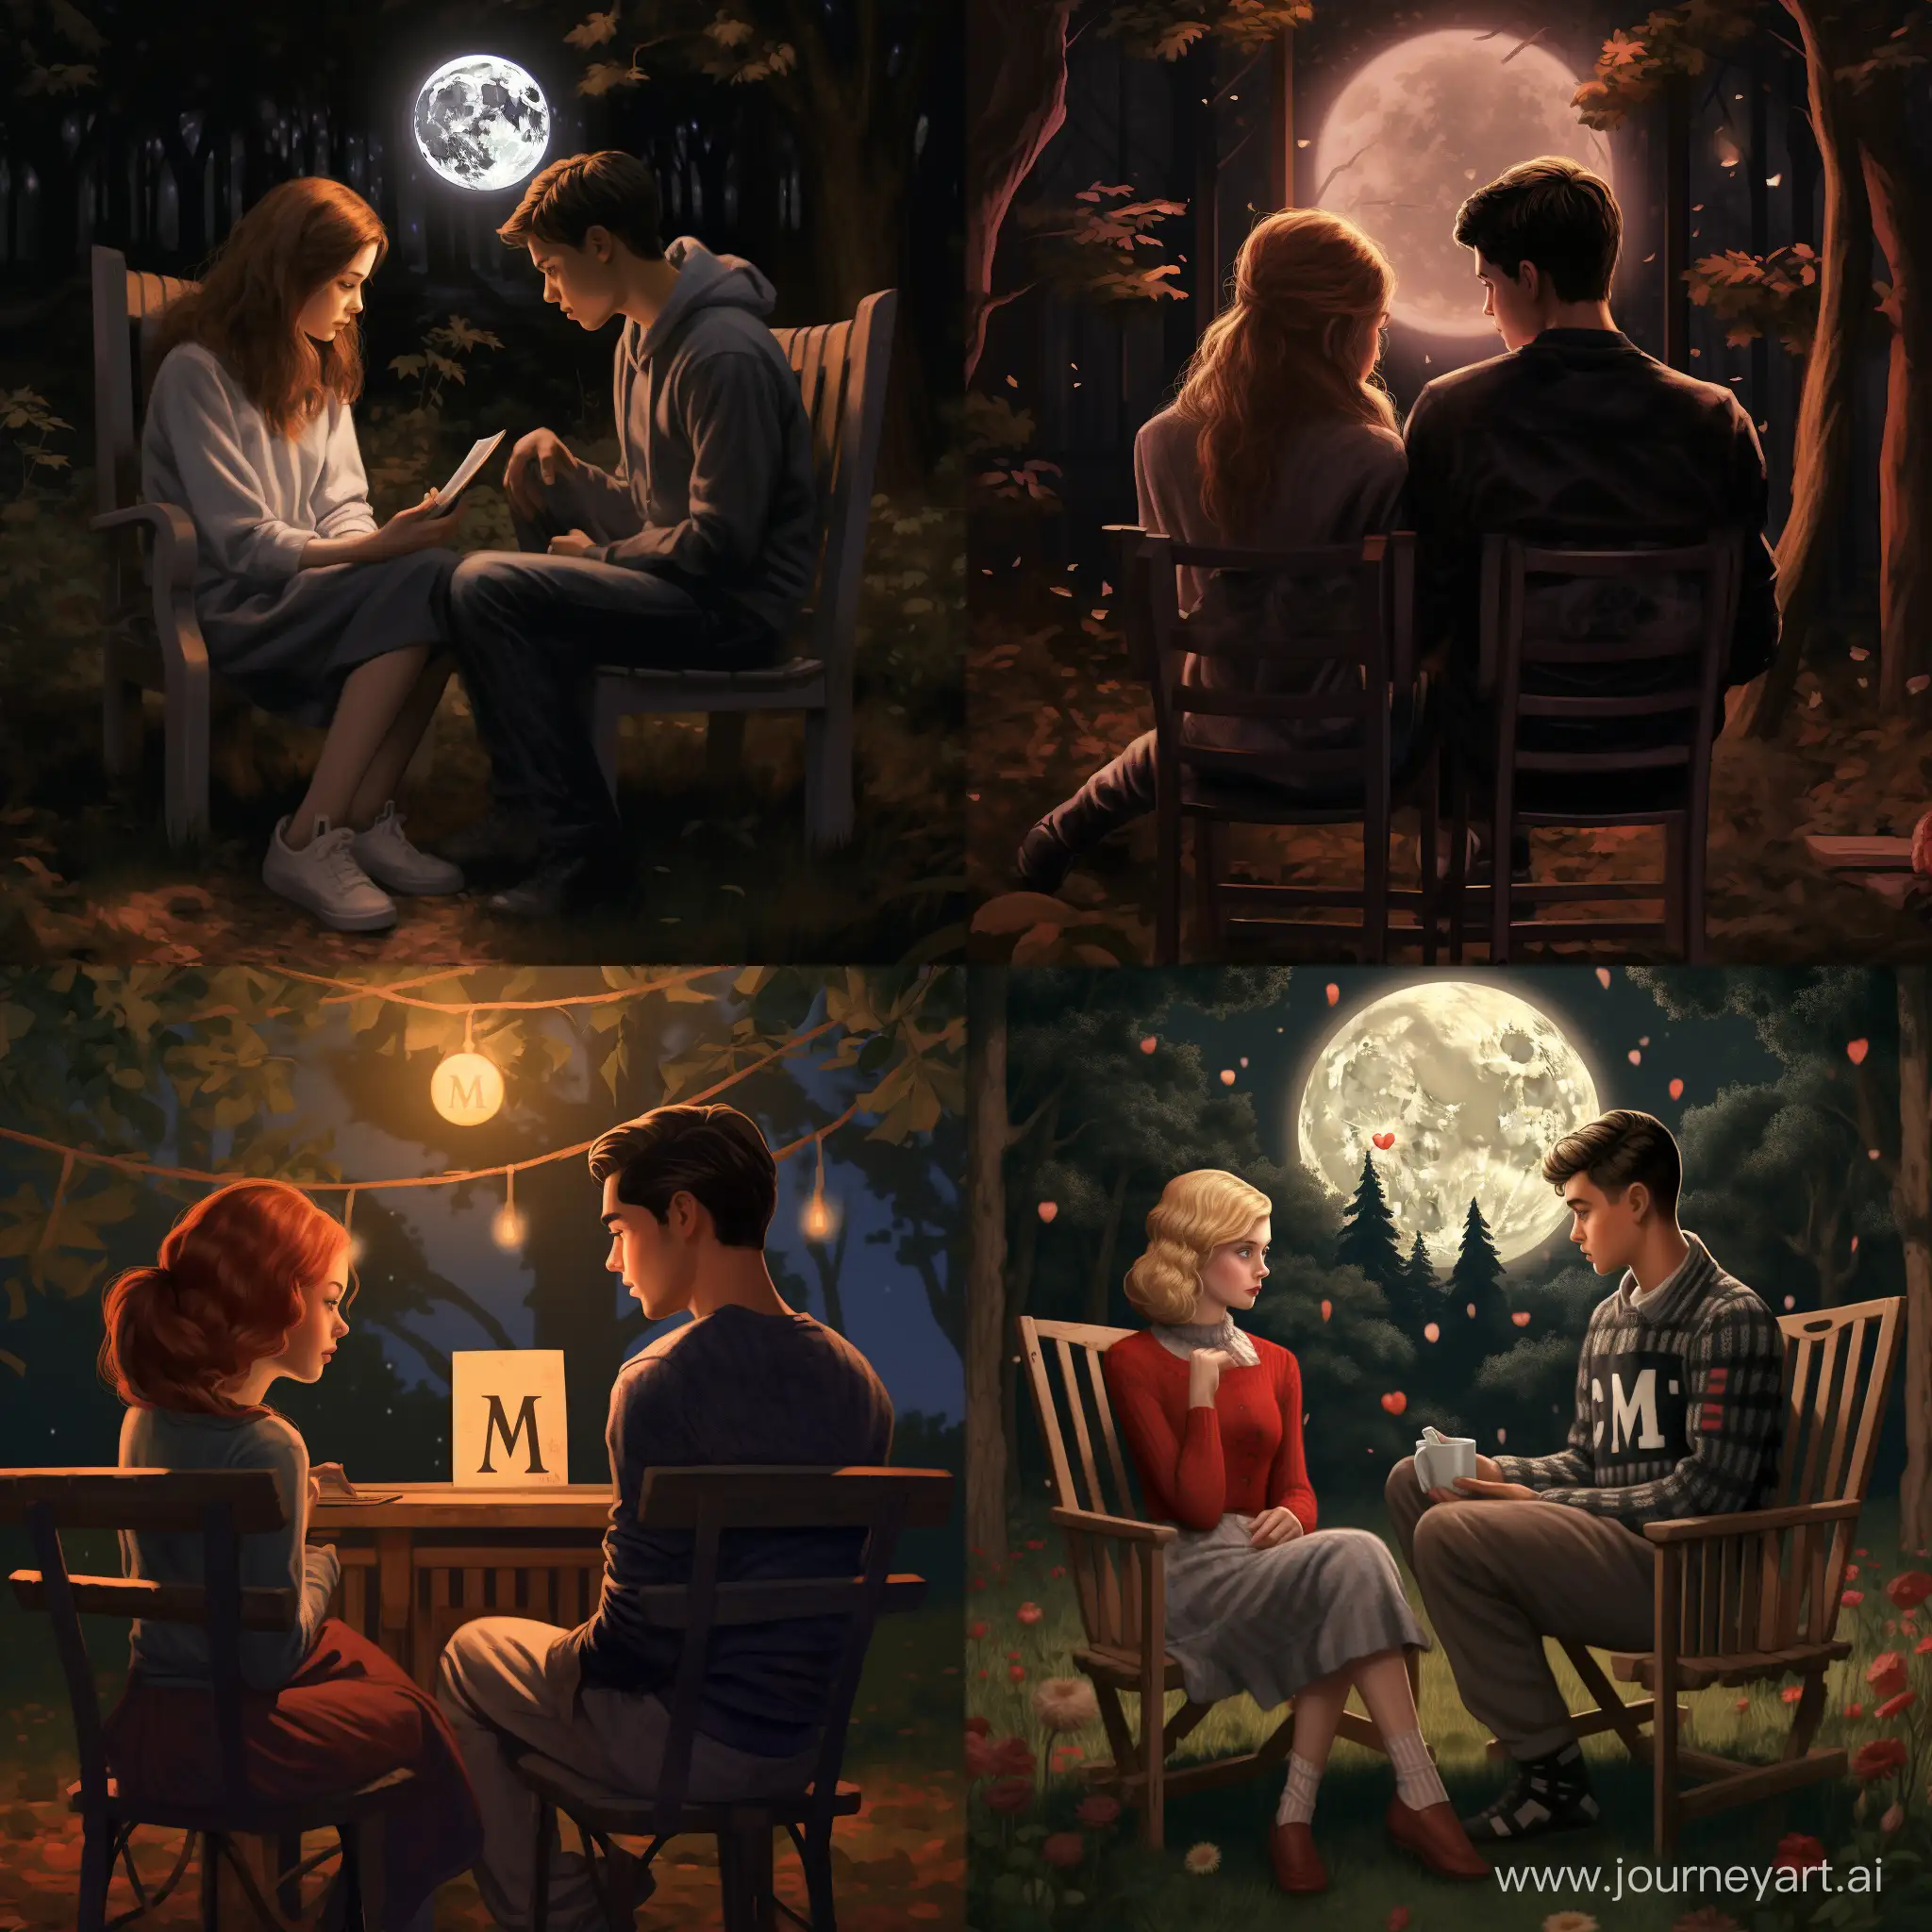 A young man and a girl are sitting on a chair in a garden, in the moonlight, wearing a sweater. The girl has the letter M written on her sweater, and the boy has the letter A written on his sweater.